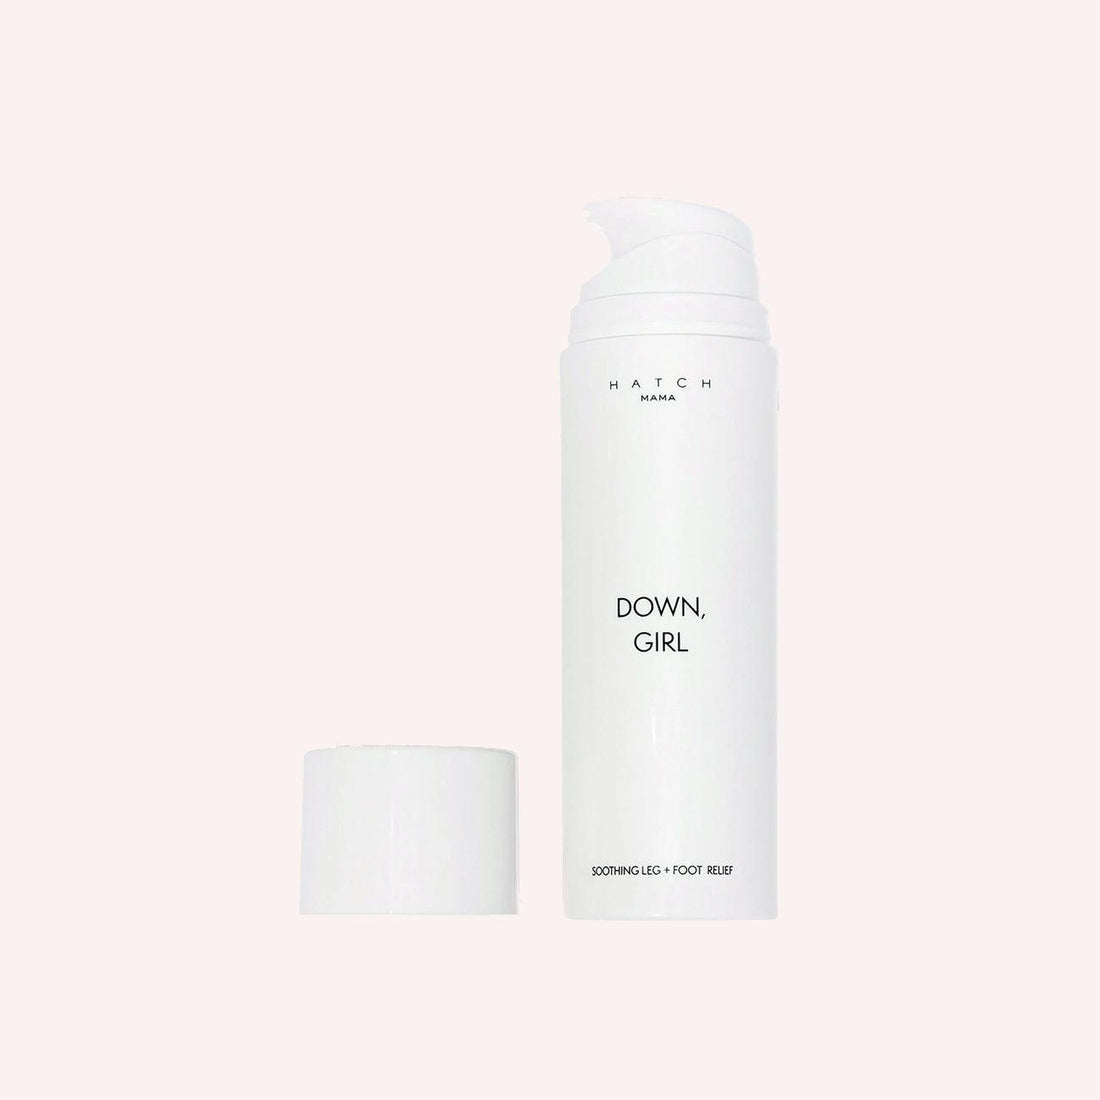 Down, Girl - Soothing Leg + Foot Relief